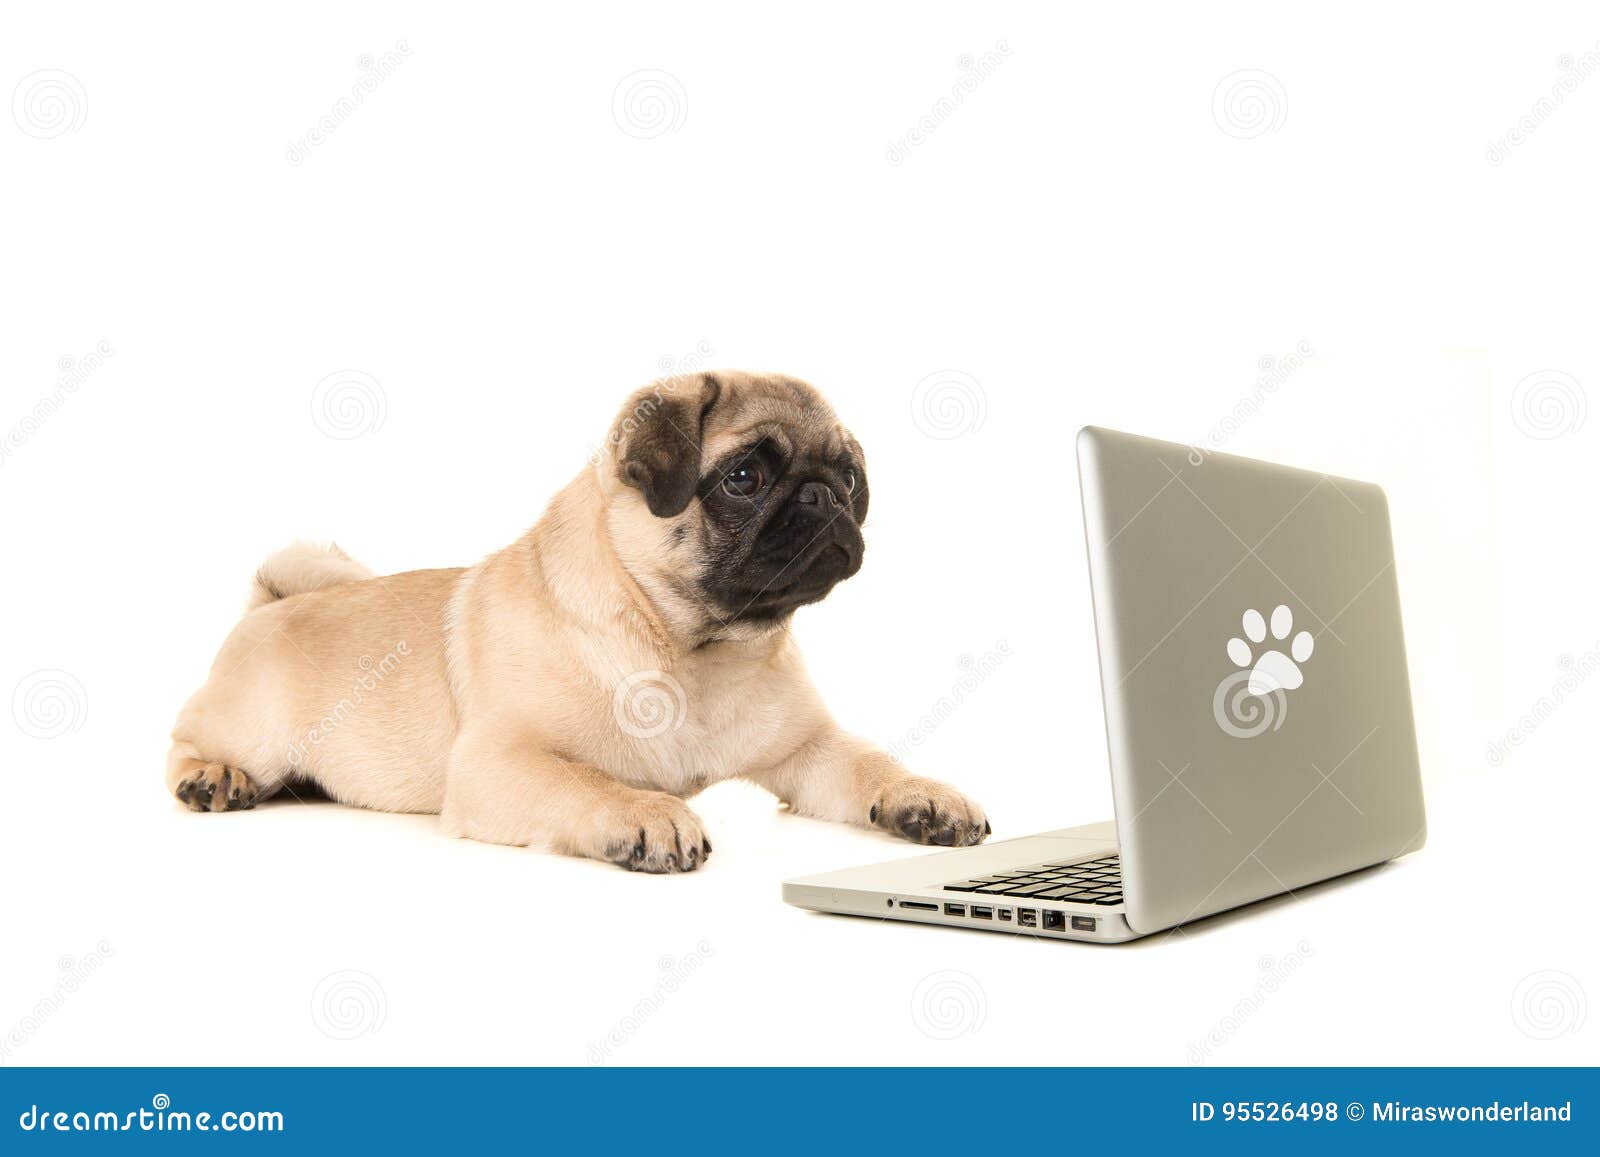 young pug dog lying on the floor looking at a labtop